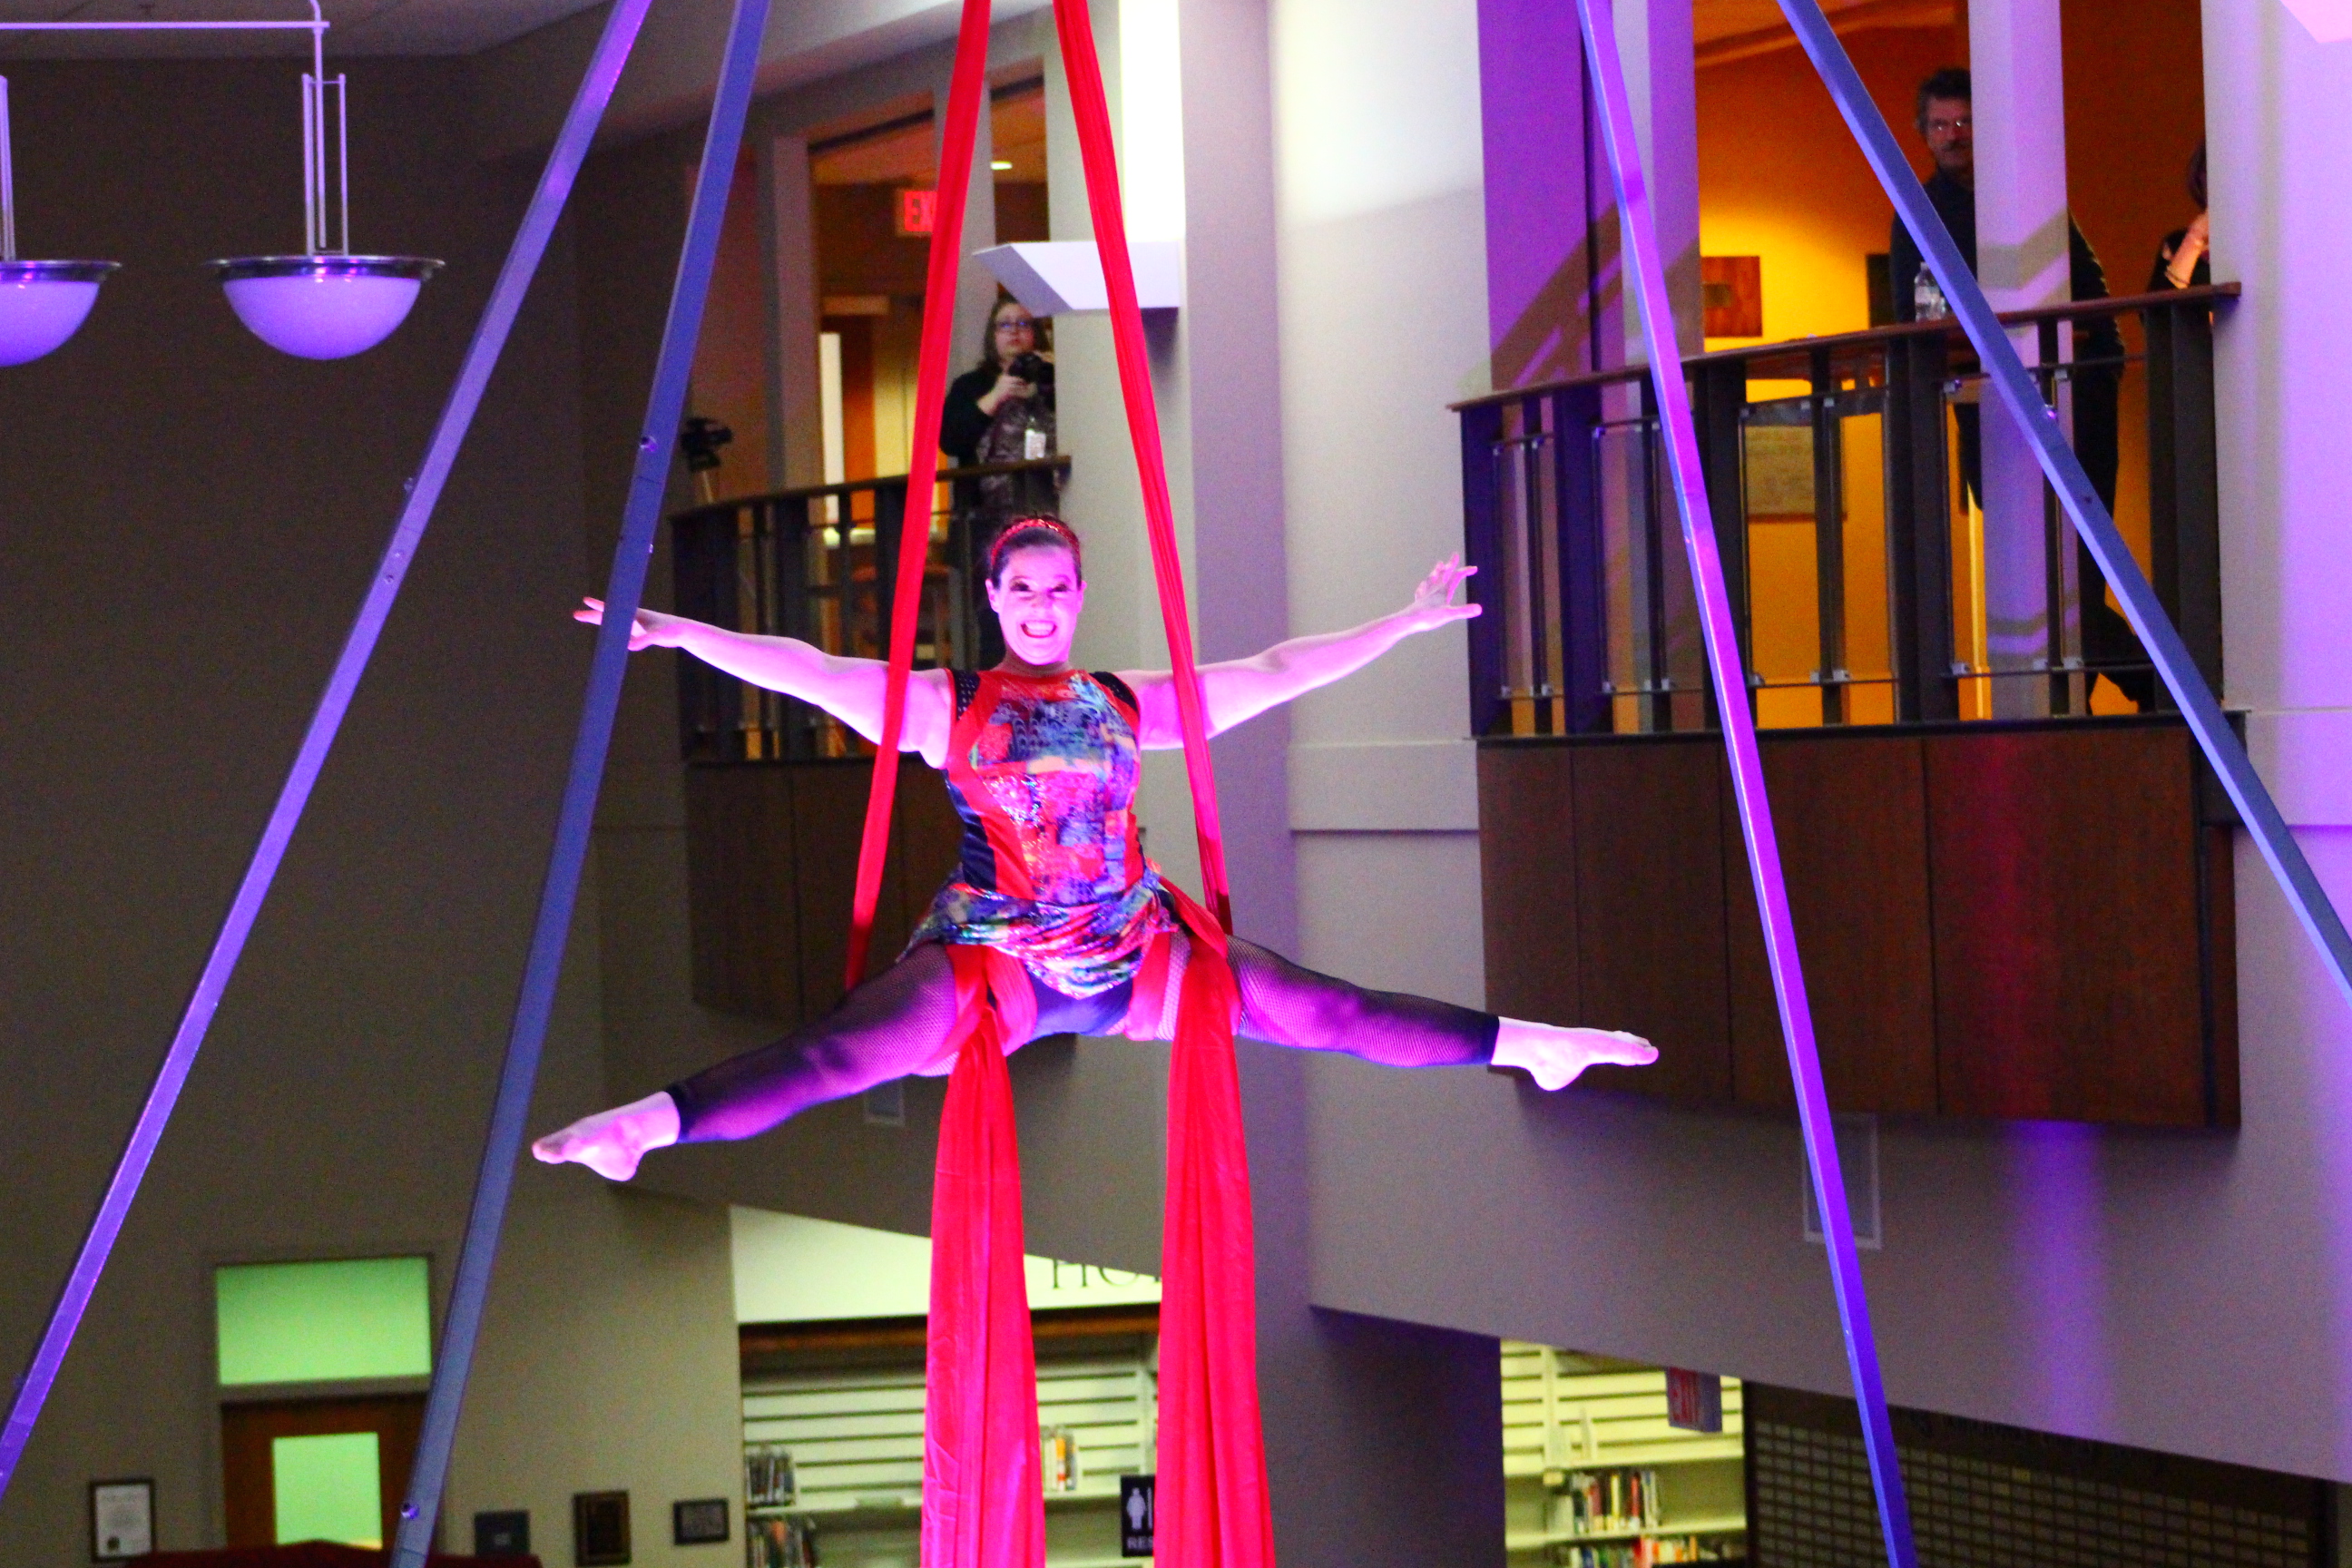 Aerial performer suspended from ropes wrapped around her limbs